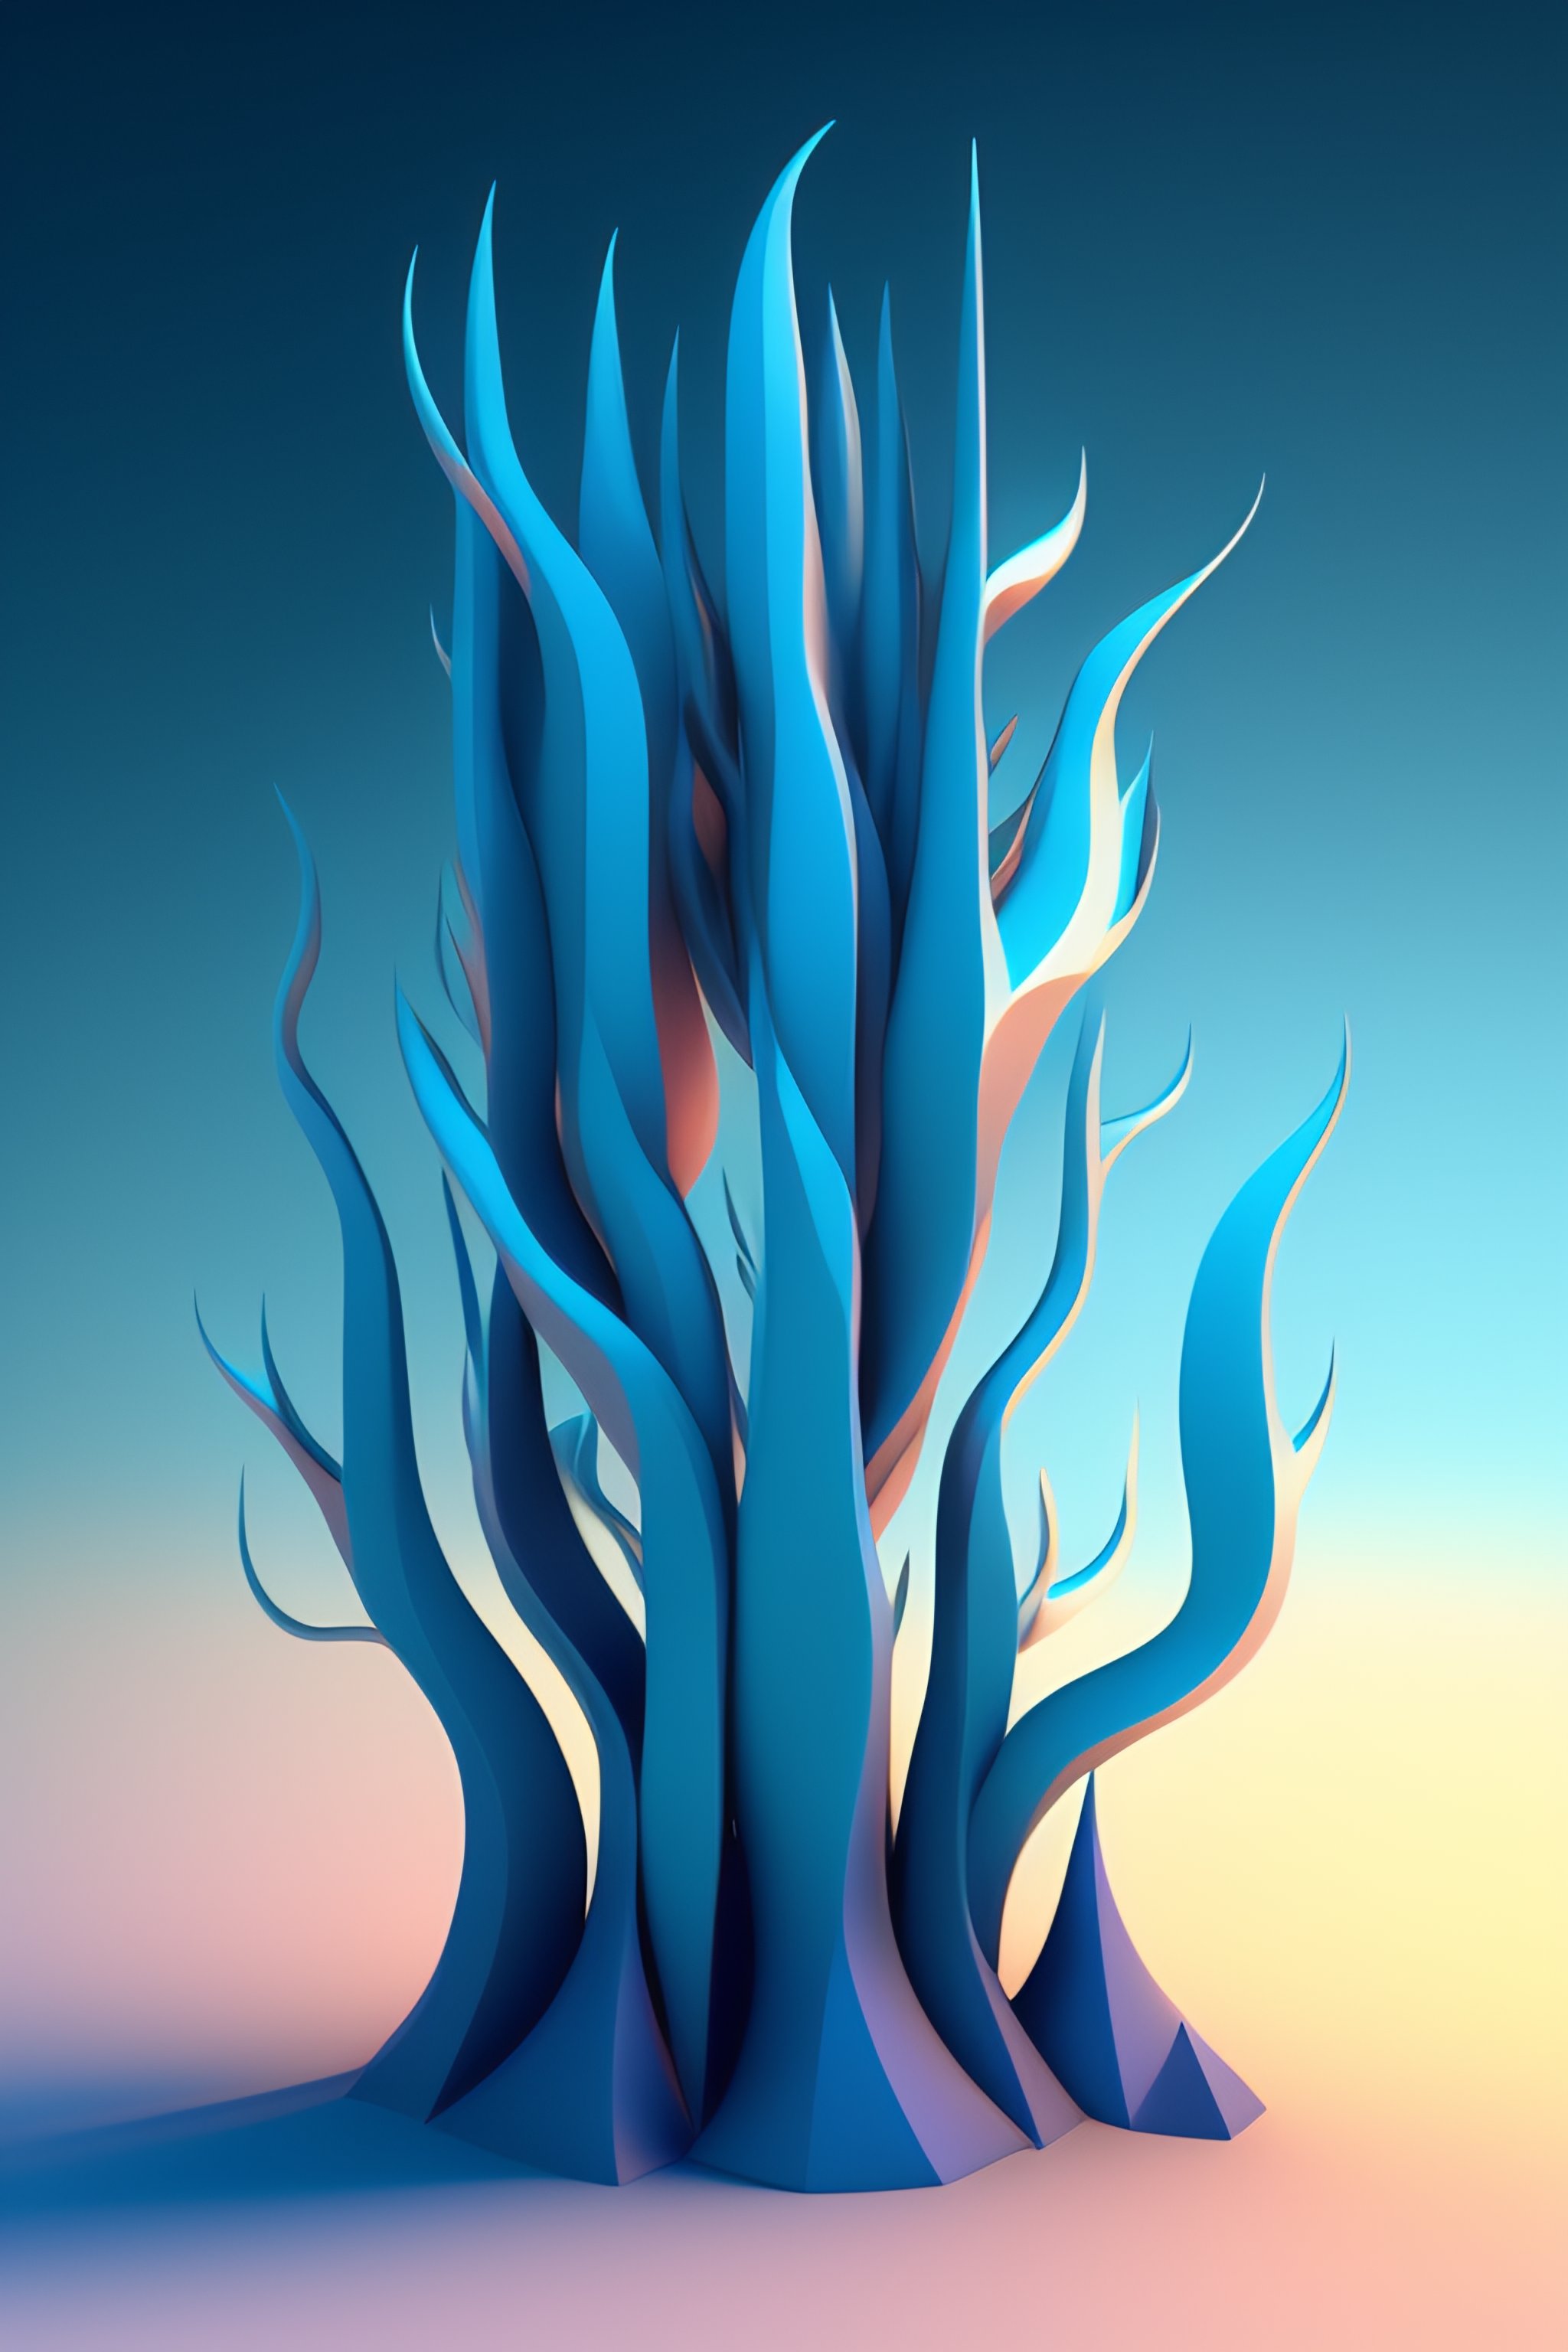 lexica-stylized-3d-model-of-an-alien-group-of-trees-with-weird